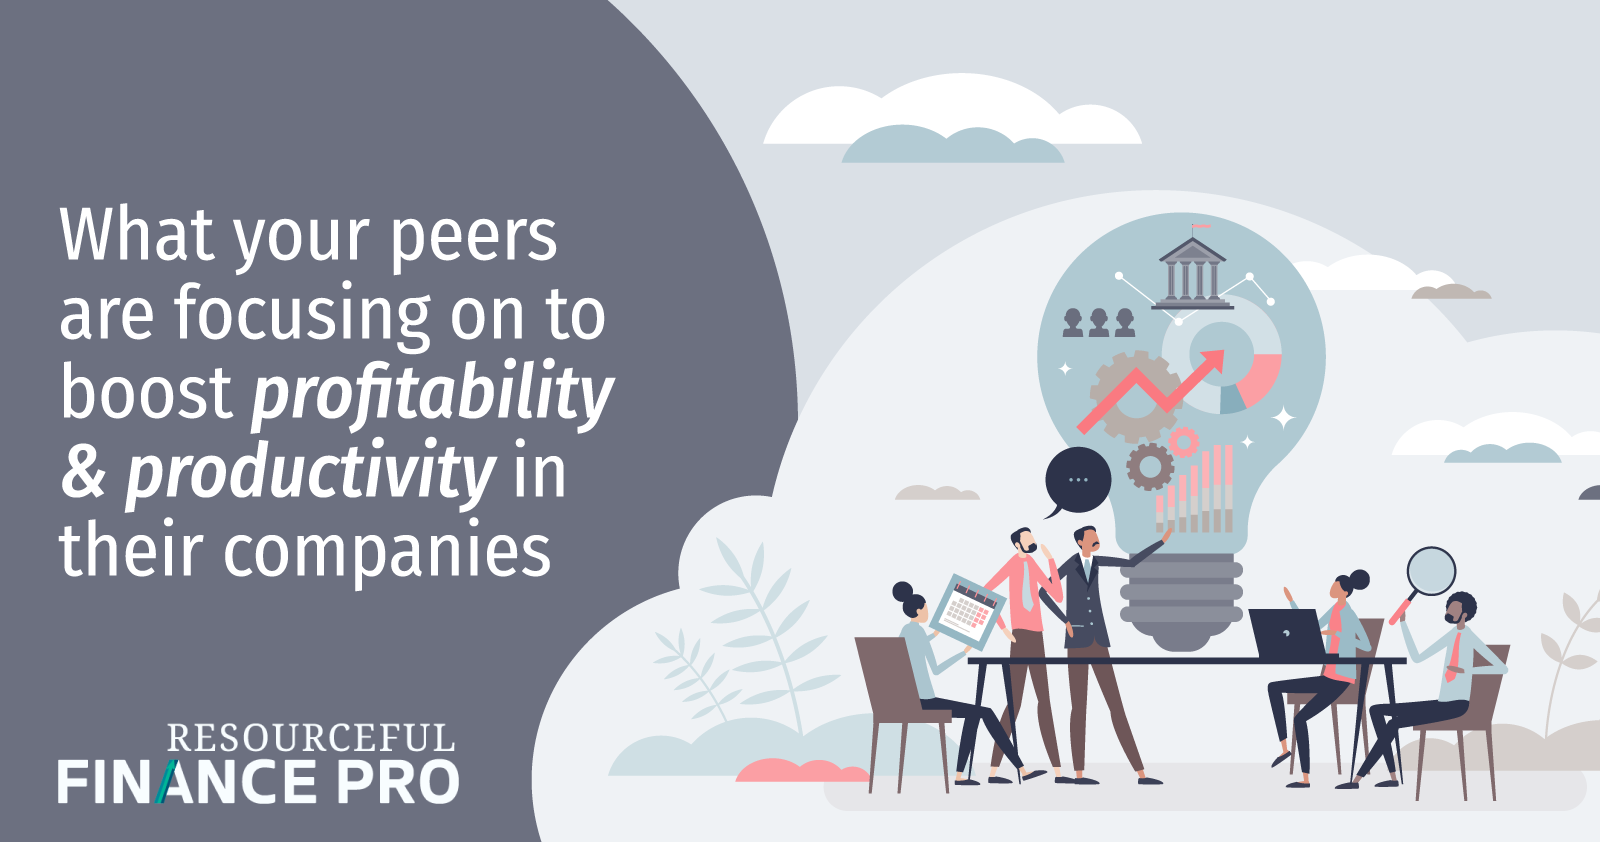 What Your Peers Are Focusing On To Boost Profitability & Productivity In Their Companies